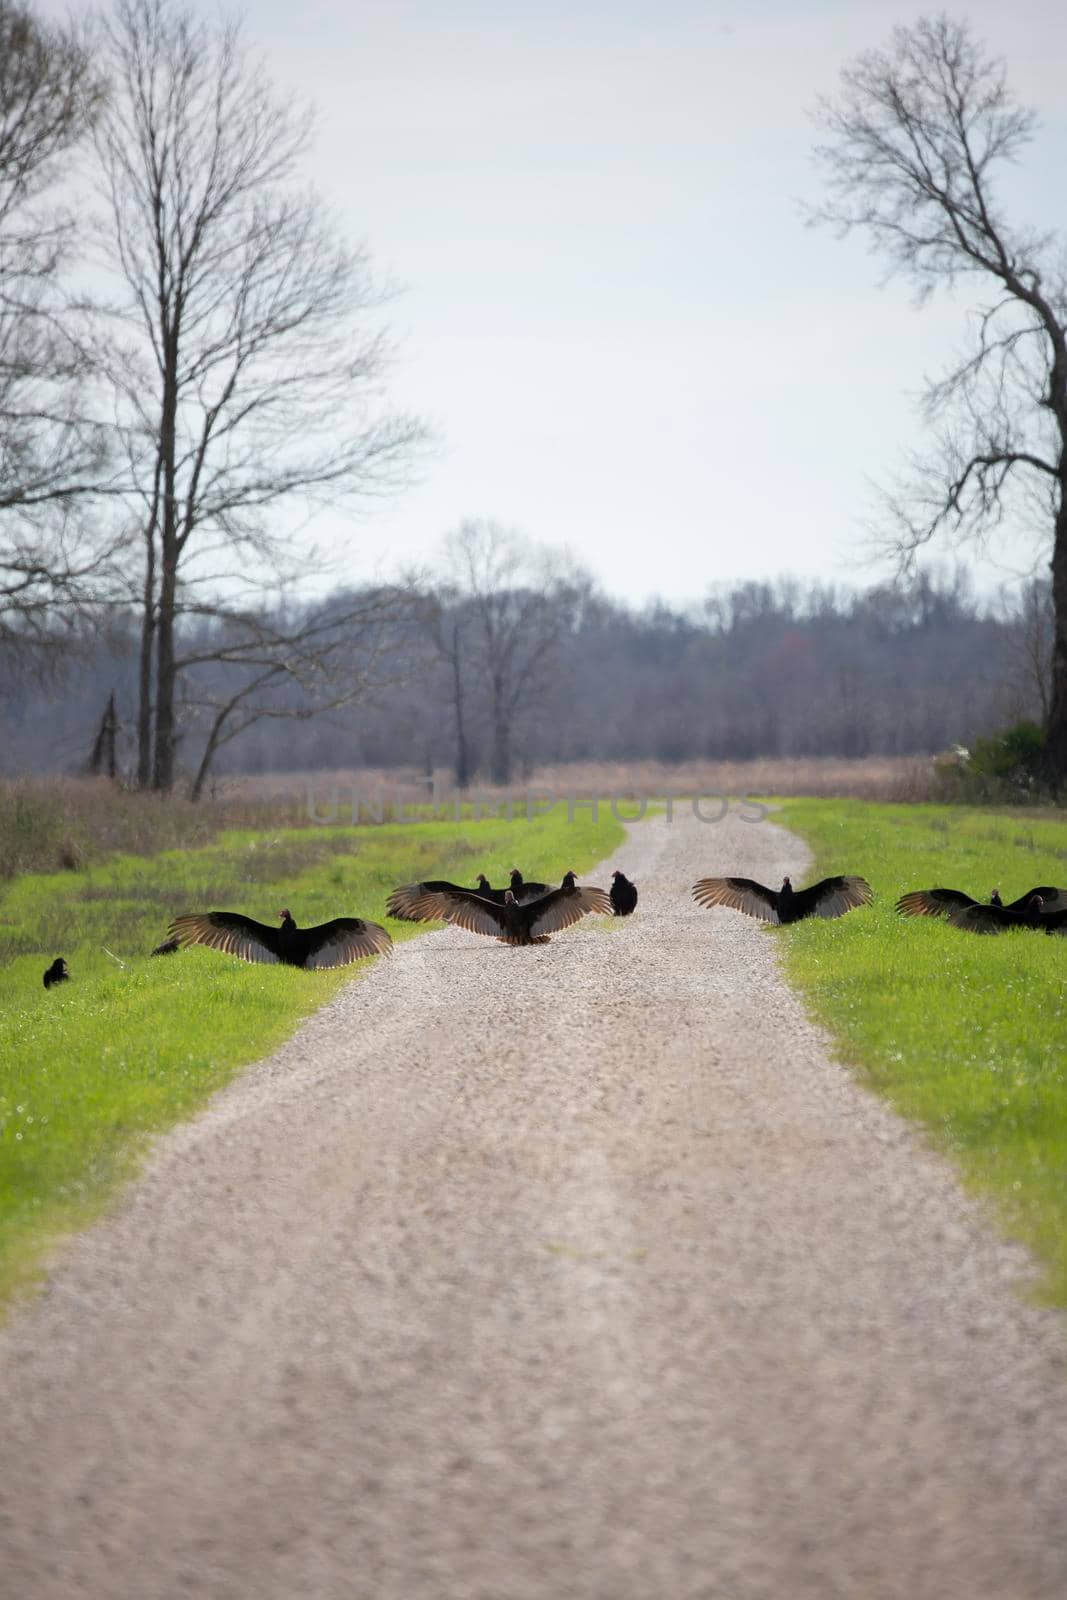 Flock of black vultures (Coragyps atratus) and turky vultures (Cathartes aura) blocking a gravel road in a territorial display